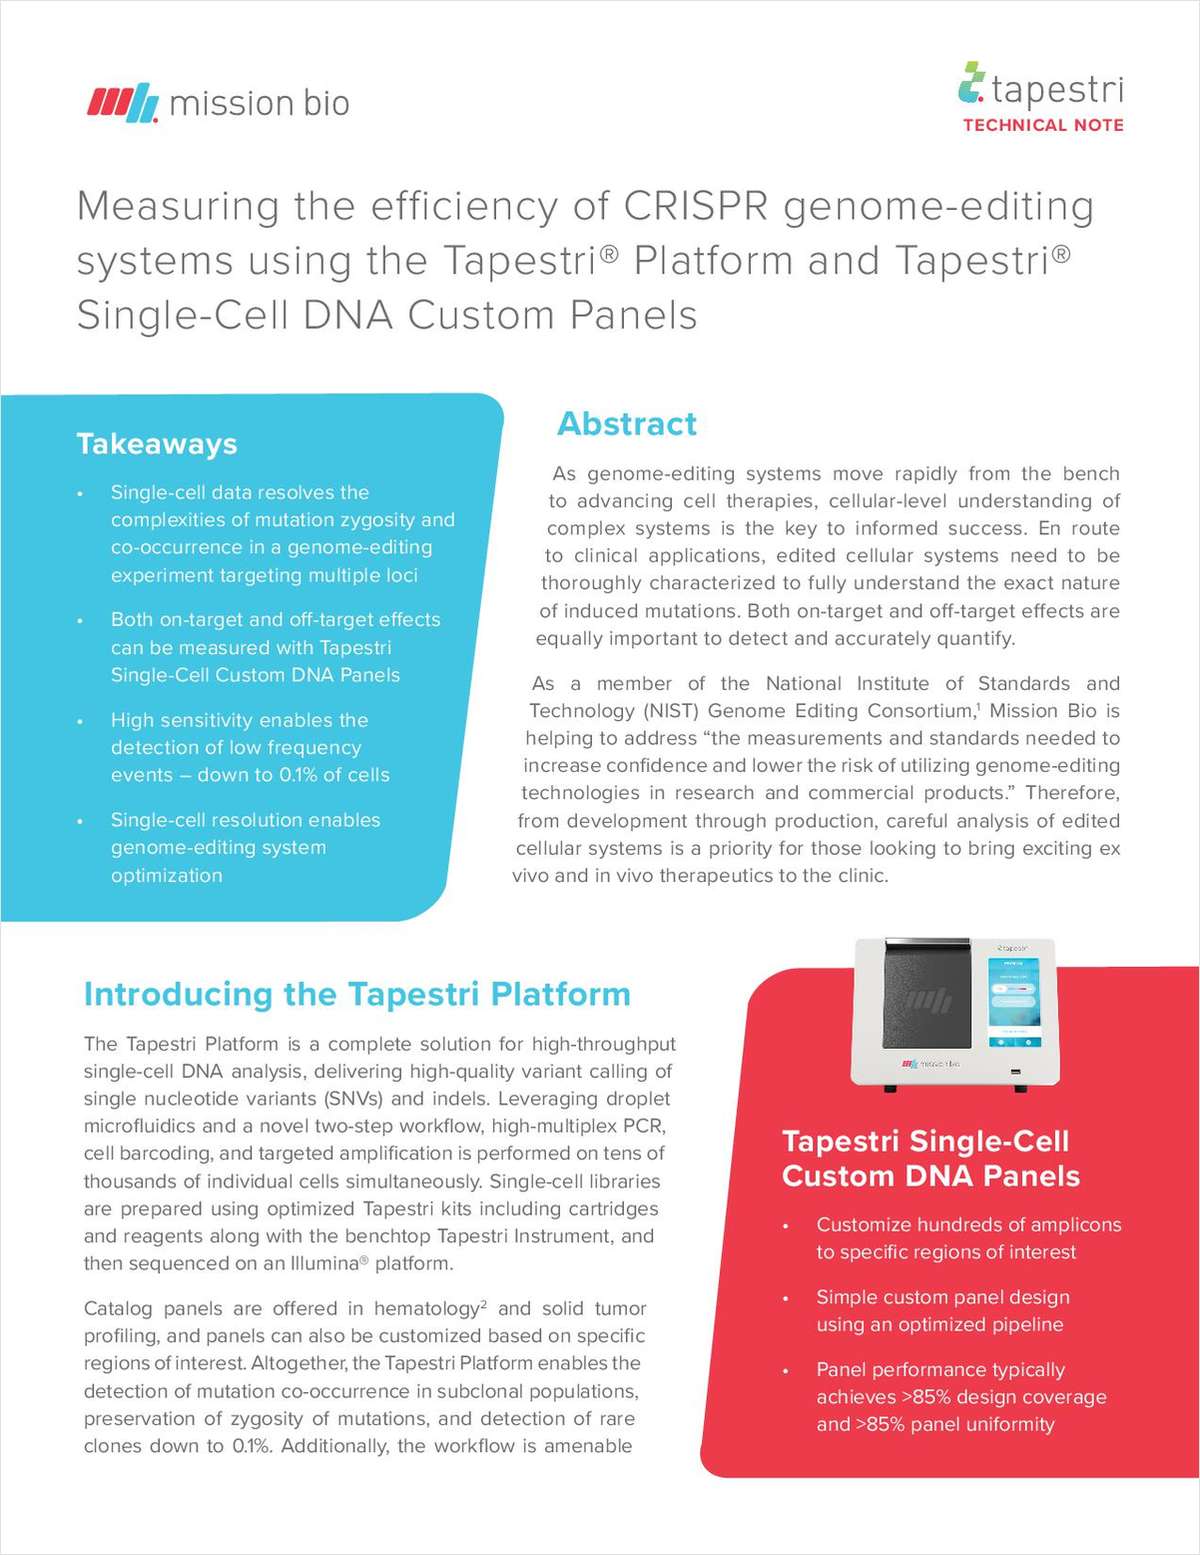 Measuring the Efficiency of CRISPR Genome Editing Systems Using the Tapestri Platform and Tapestri Single-Cell DNA Custom Panels